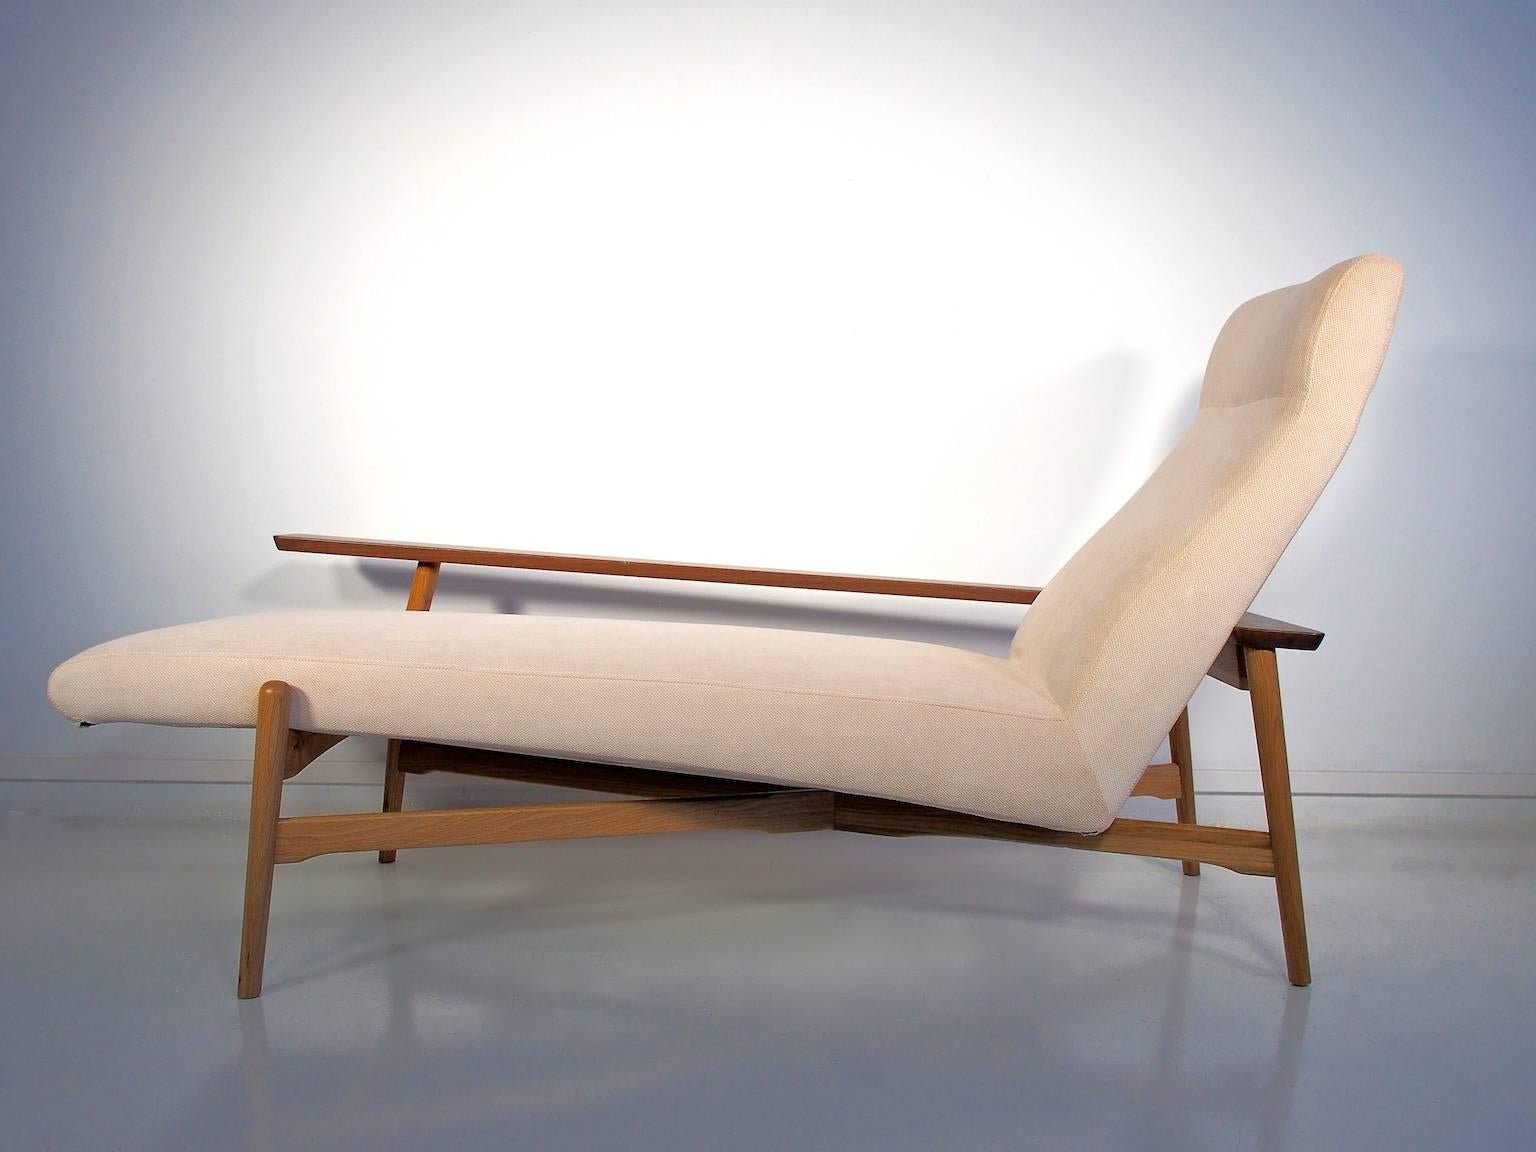 Tateishi Shoiji chaise longue with oak and walnut cross-legged base. Pale fabric upholstery. Design from circa 1950s, produced in Finland in the 2000s. Excellent condition.